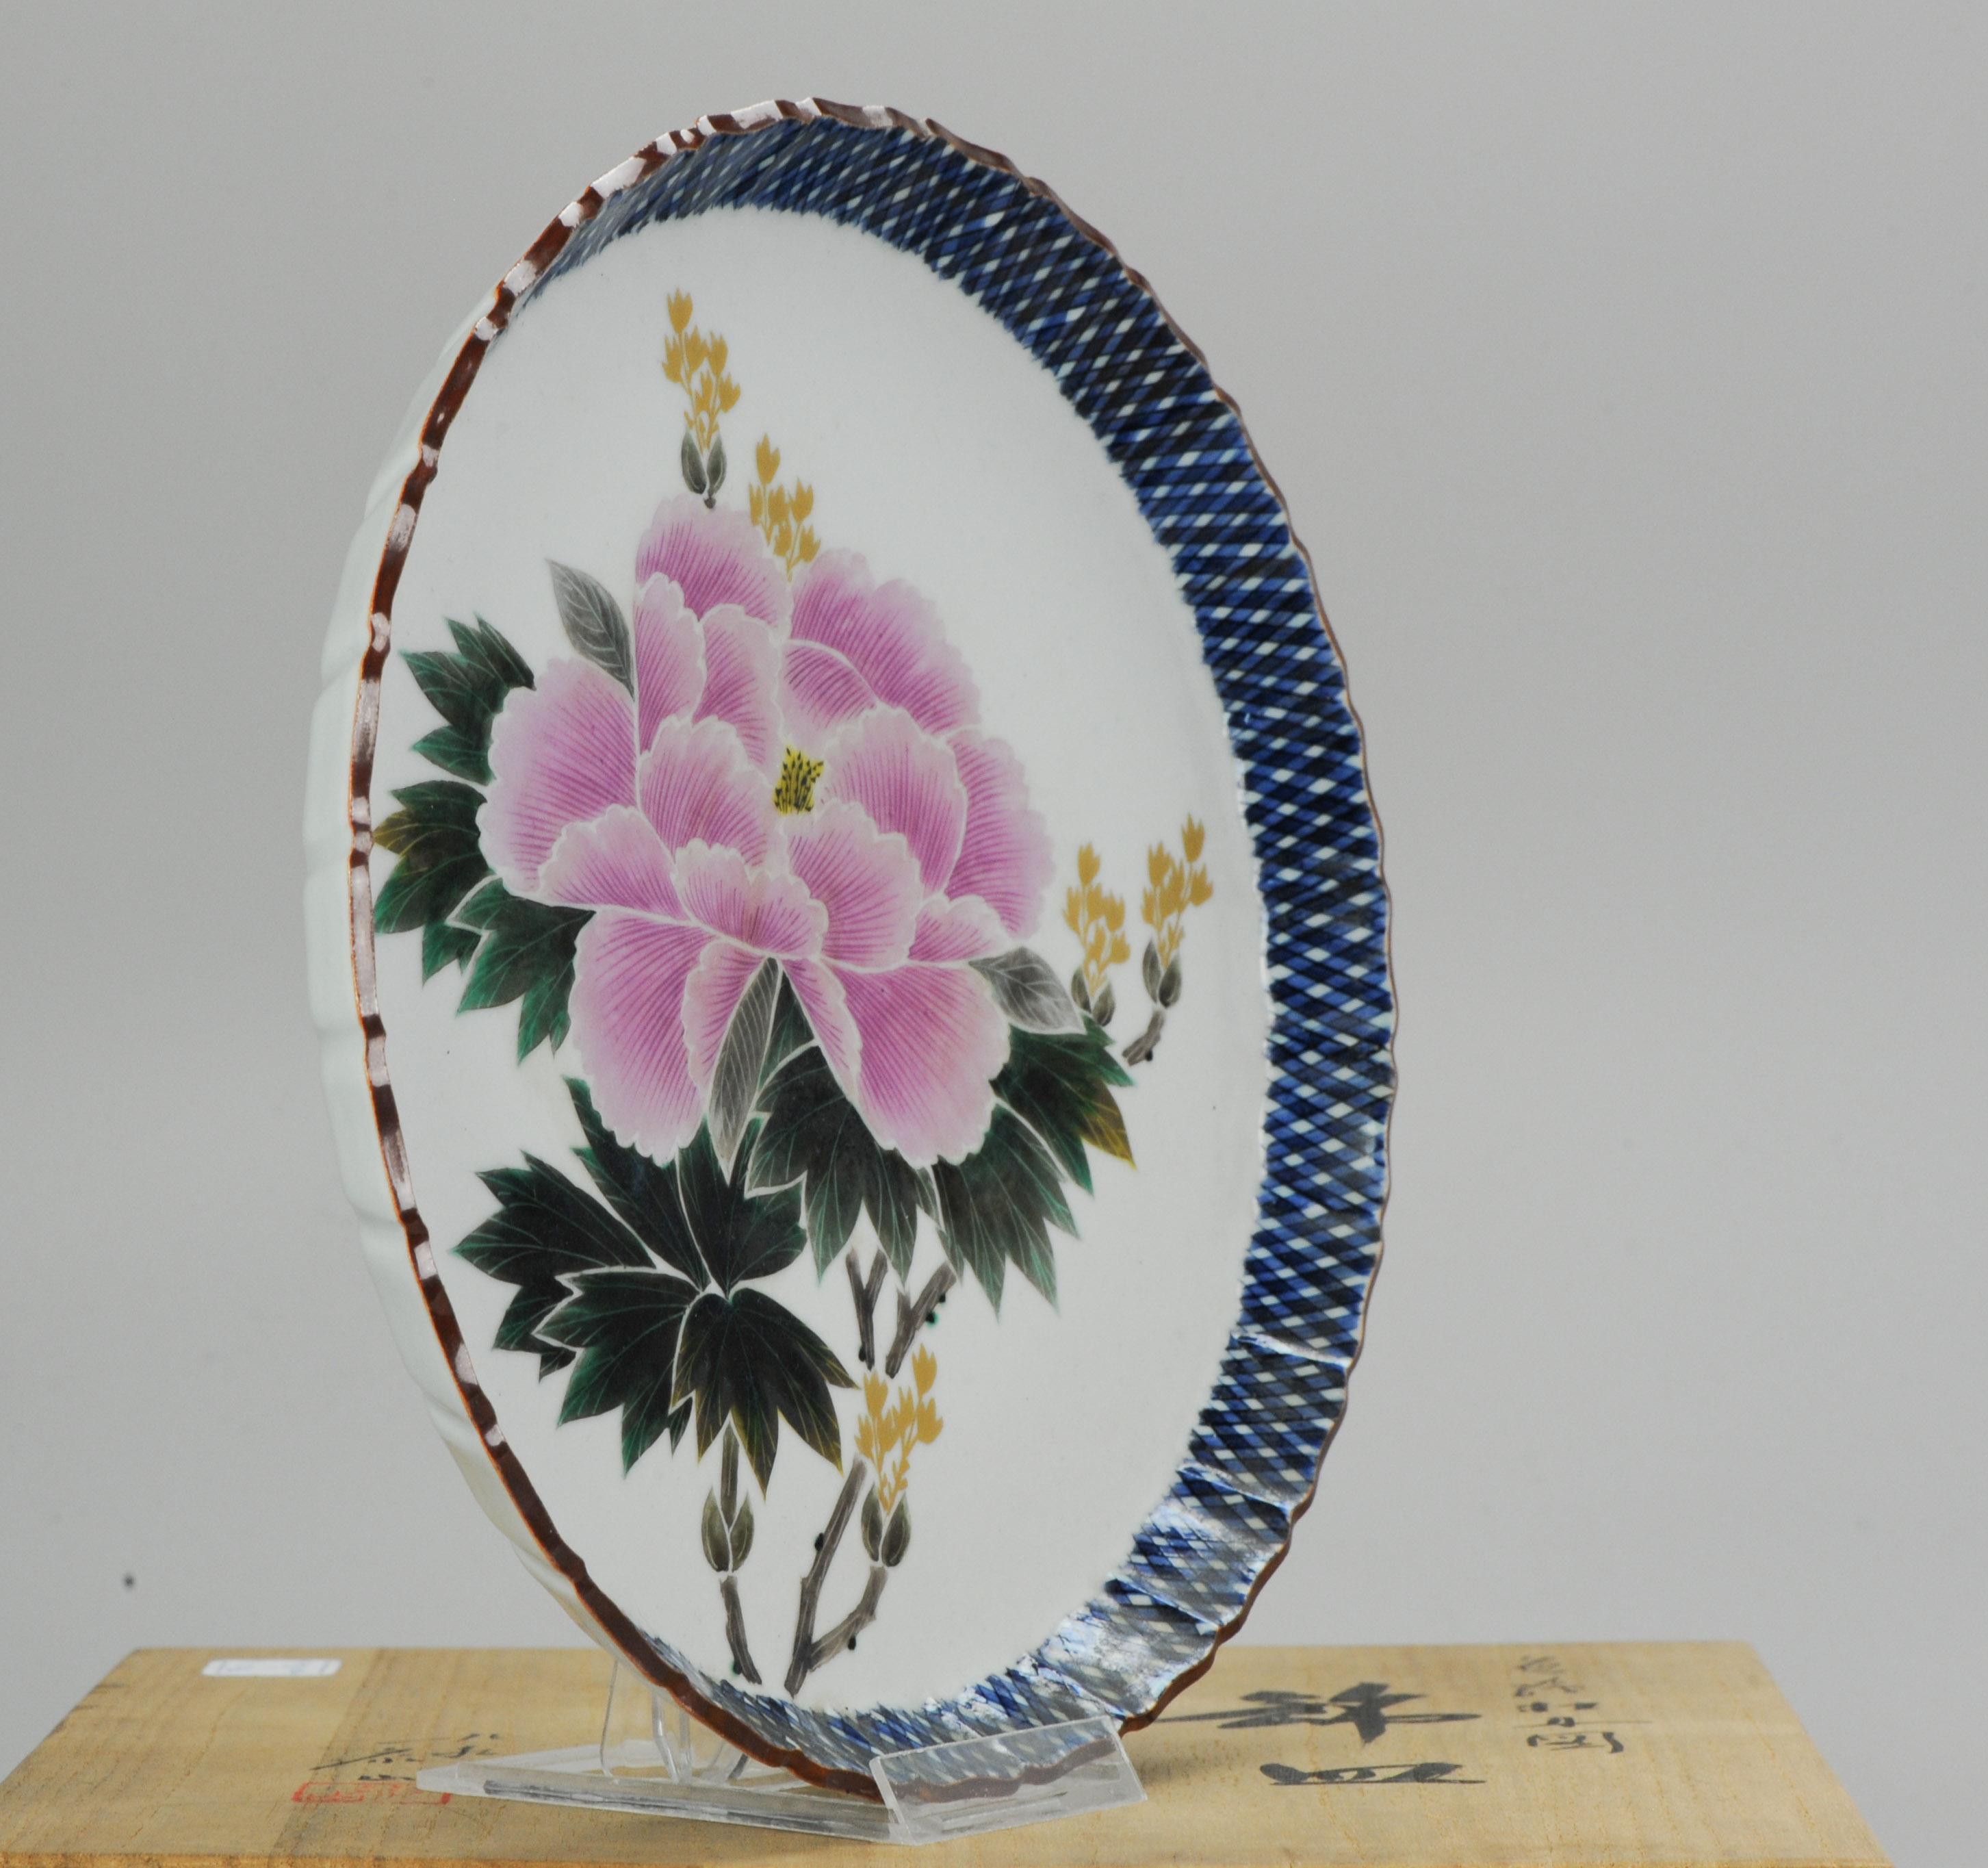 A very nicely decorated Japanese Kutani Plate, vintage.

Additional information:
Material: Porcelain & Pottery
Region of Origin: Japan
Period: 20th century
Condition: Perfect
Dimension: Ø 26 x 3.7 H cm